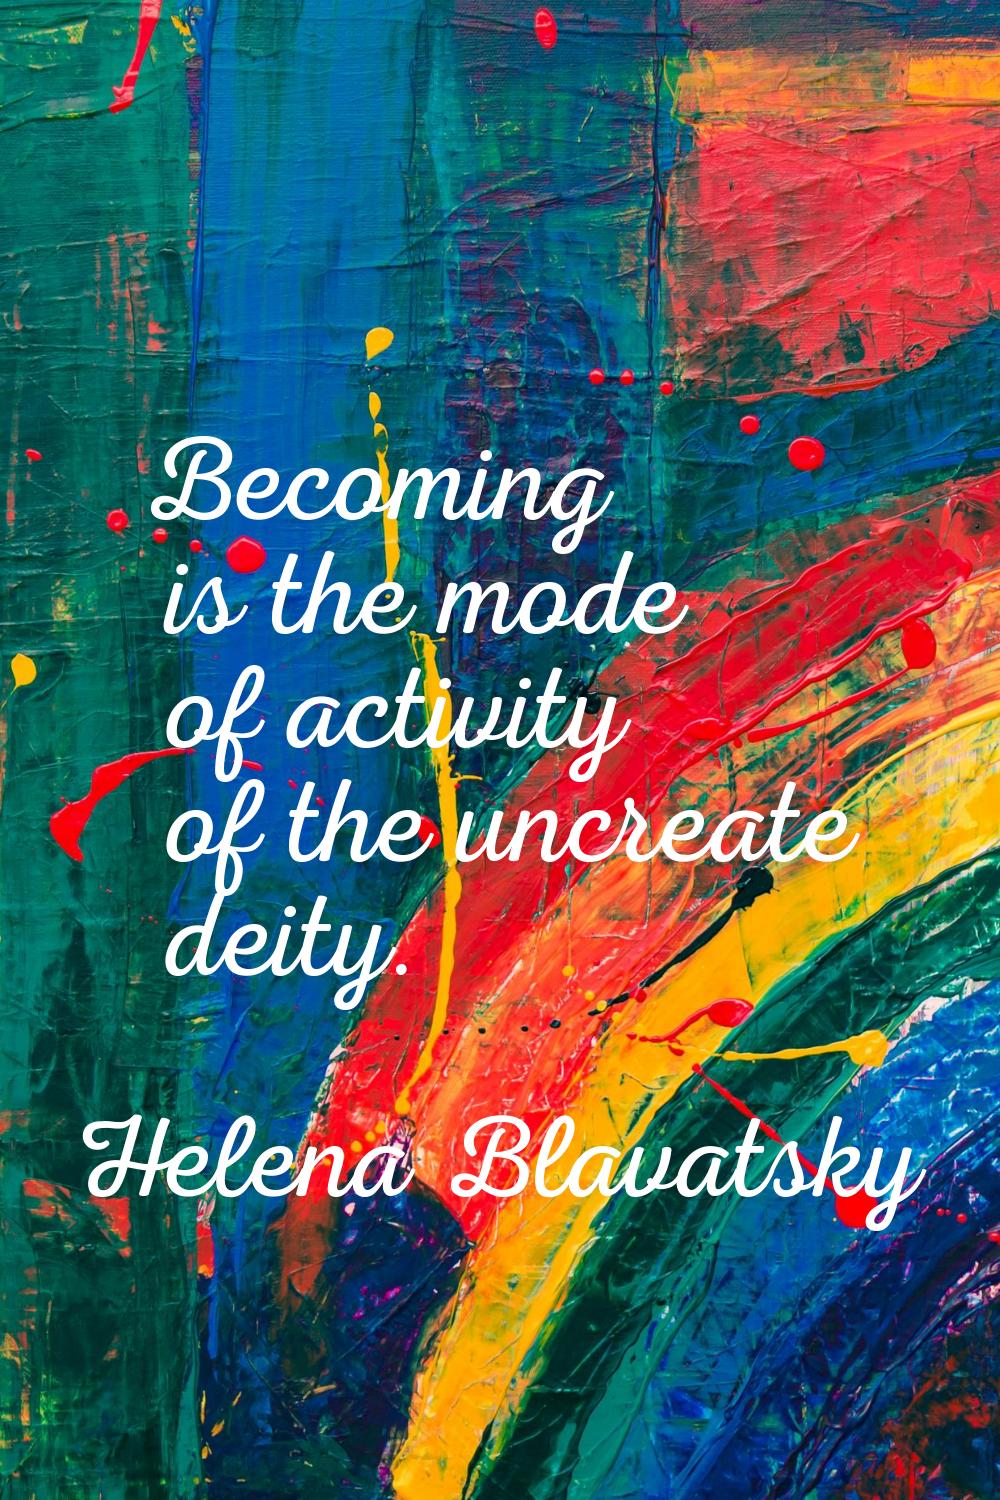 Becoming is the mode of activity of the uncreate deity.